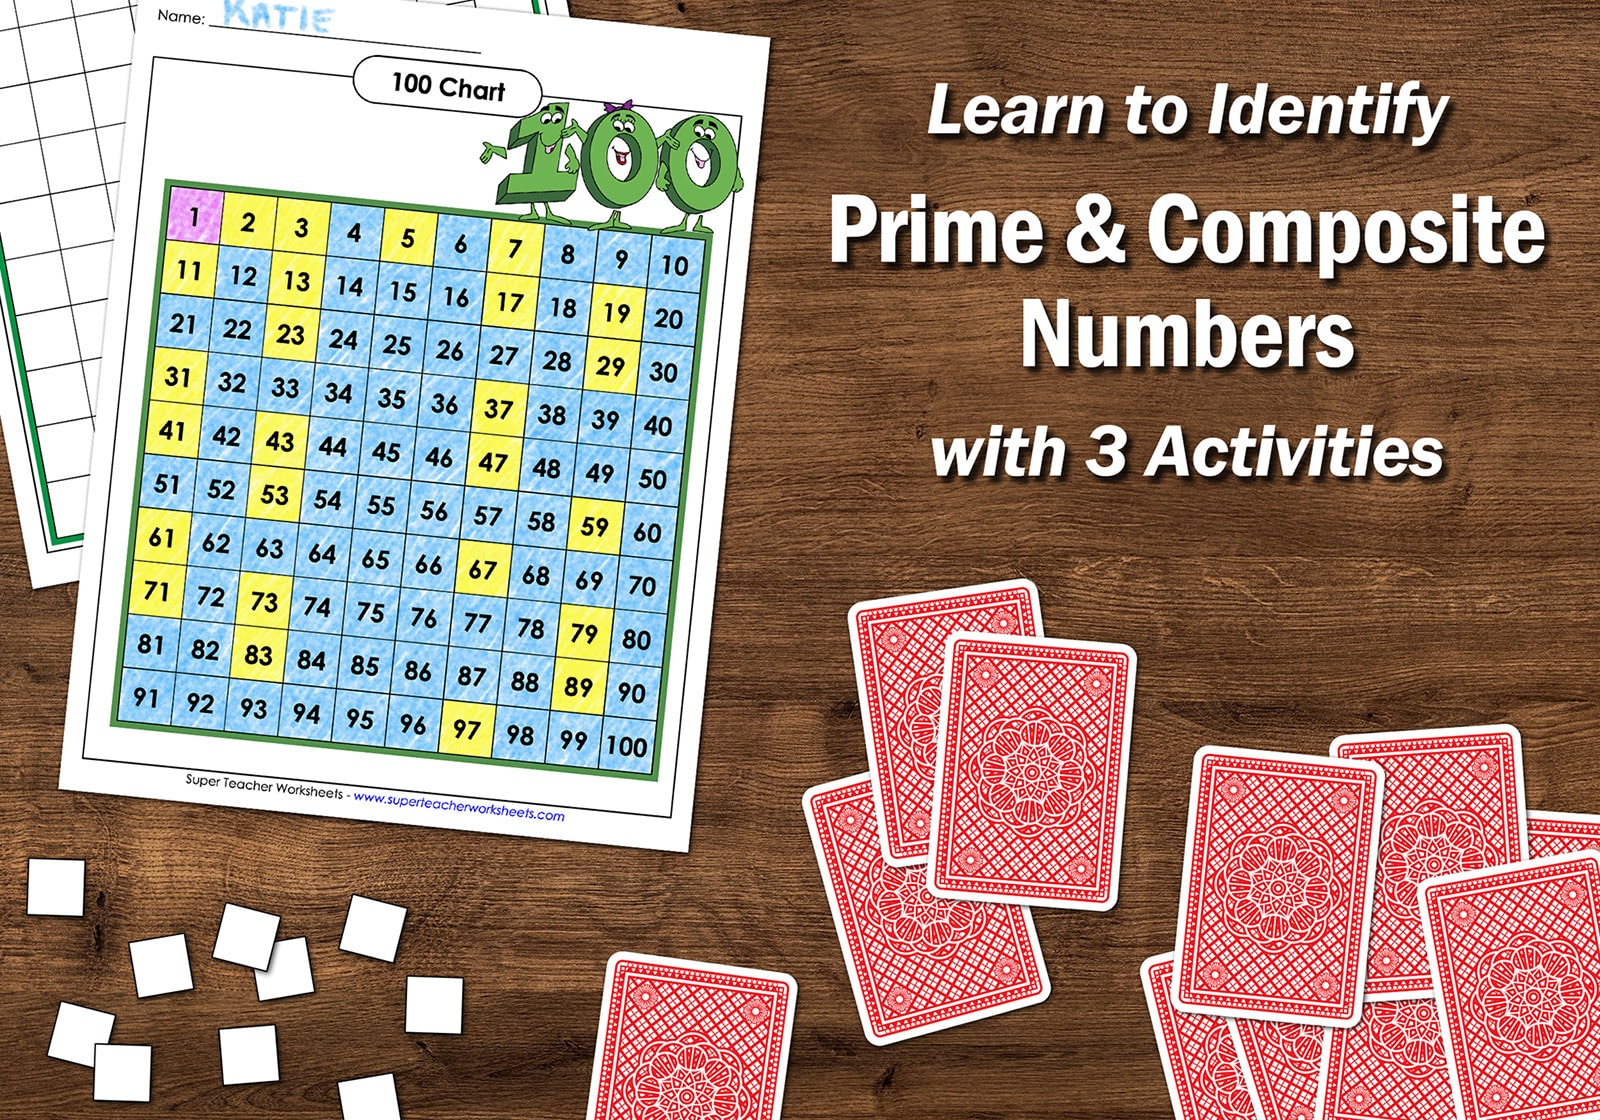 Practice Prime and Composite Numbers with 3 Activities 